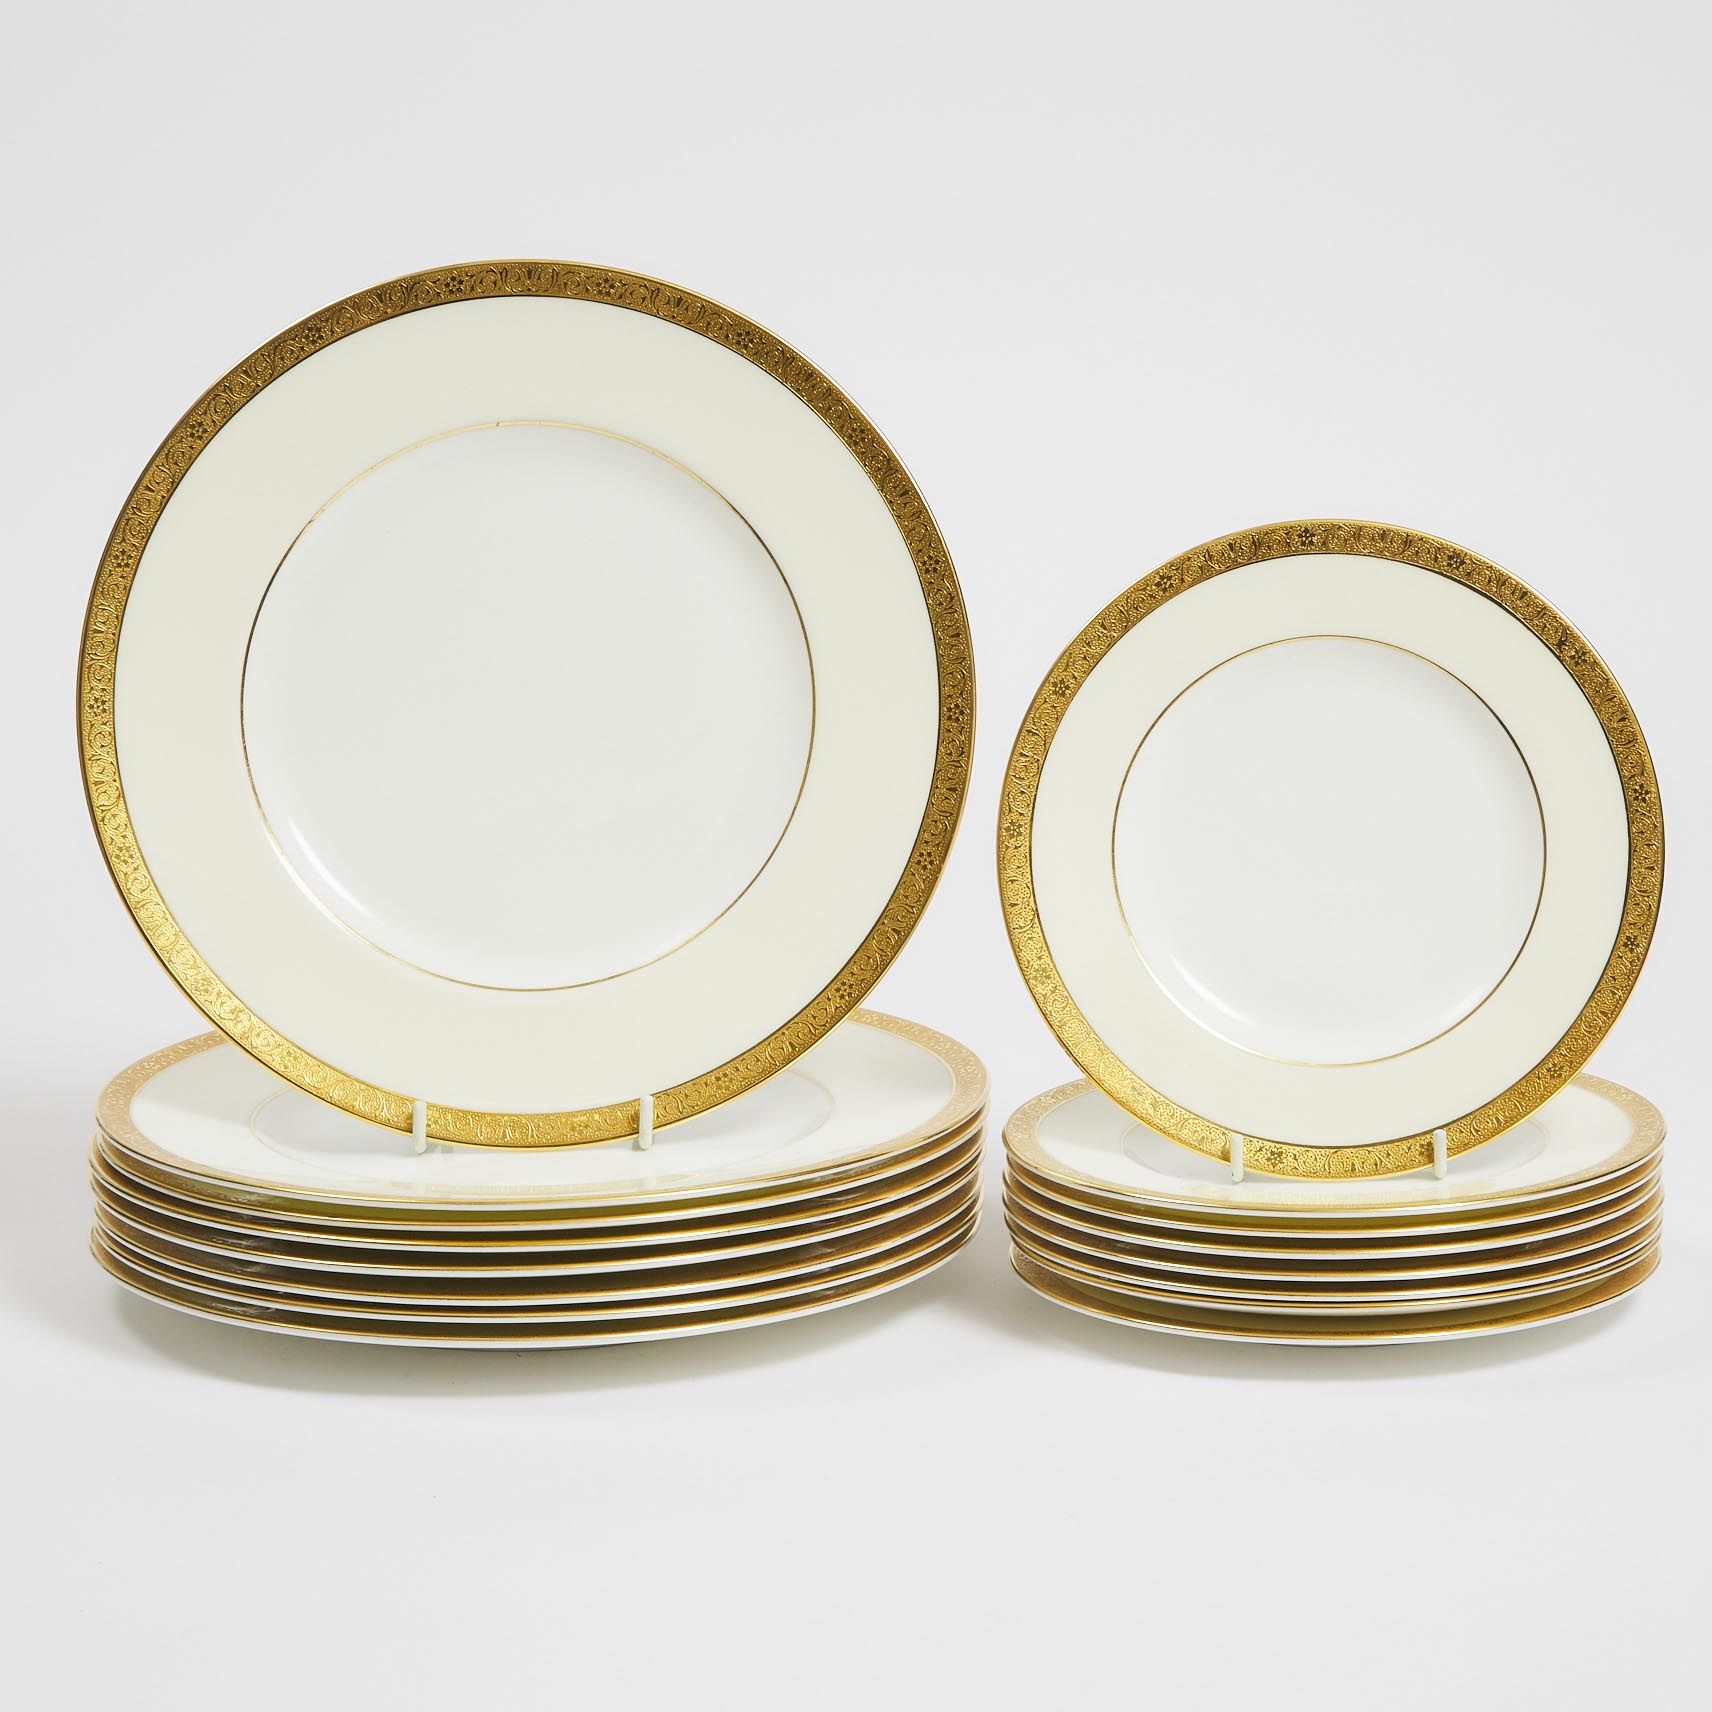 Eight Minton 'Westminster' Pattern Dinner Plates and Eight Luncheon Plates, 20th century